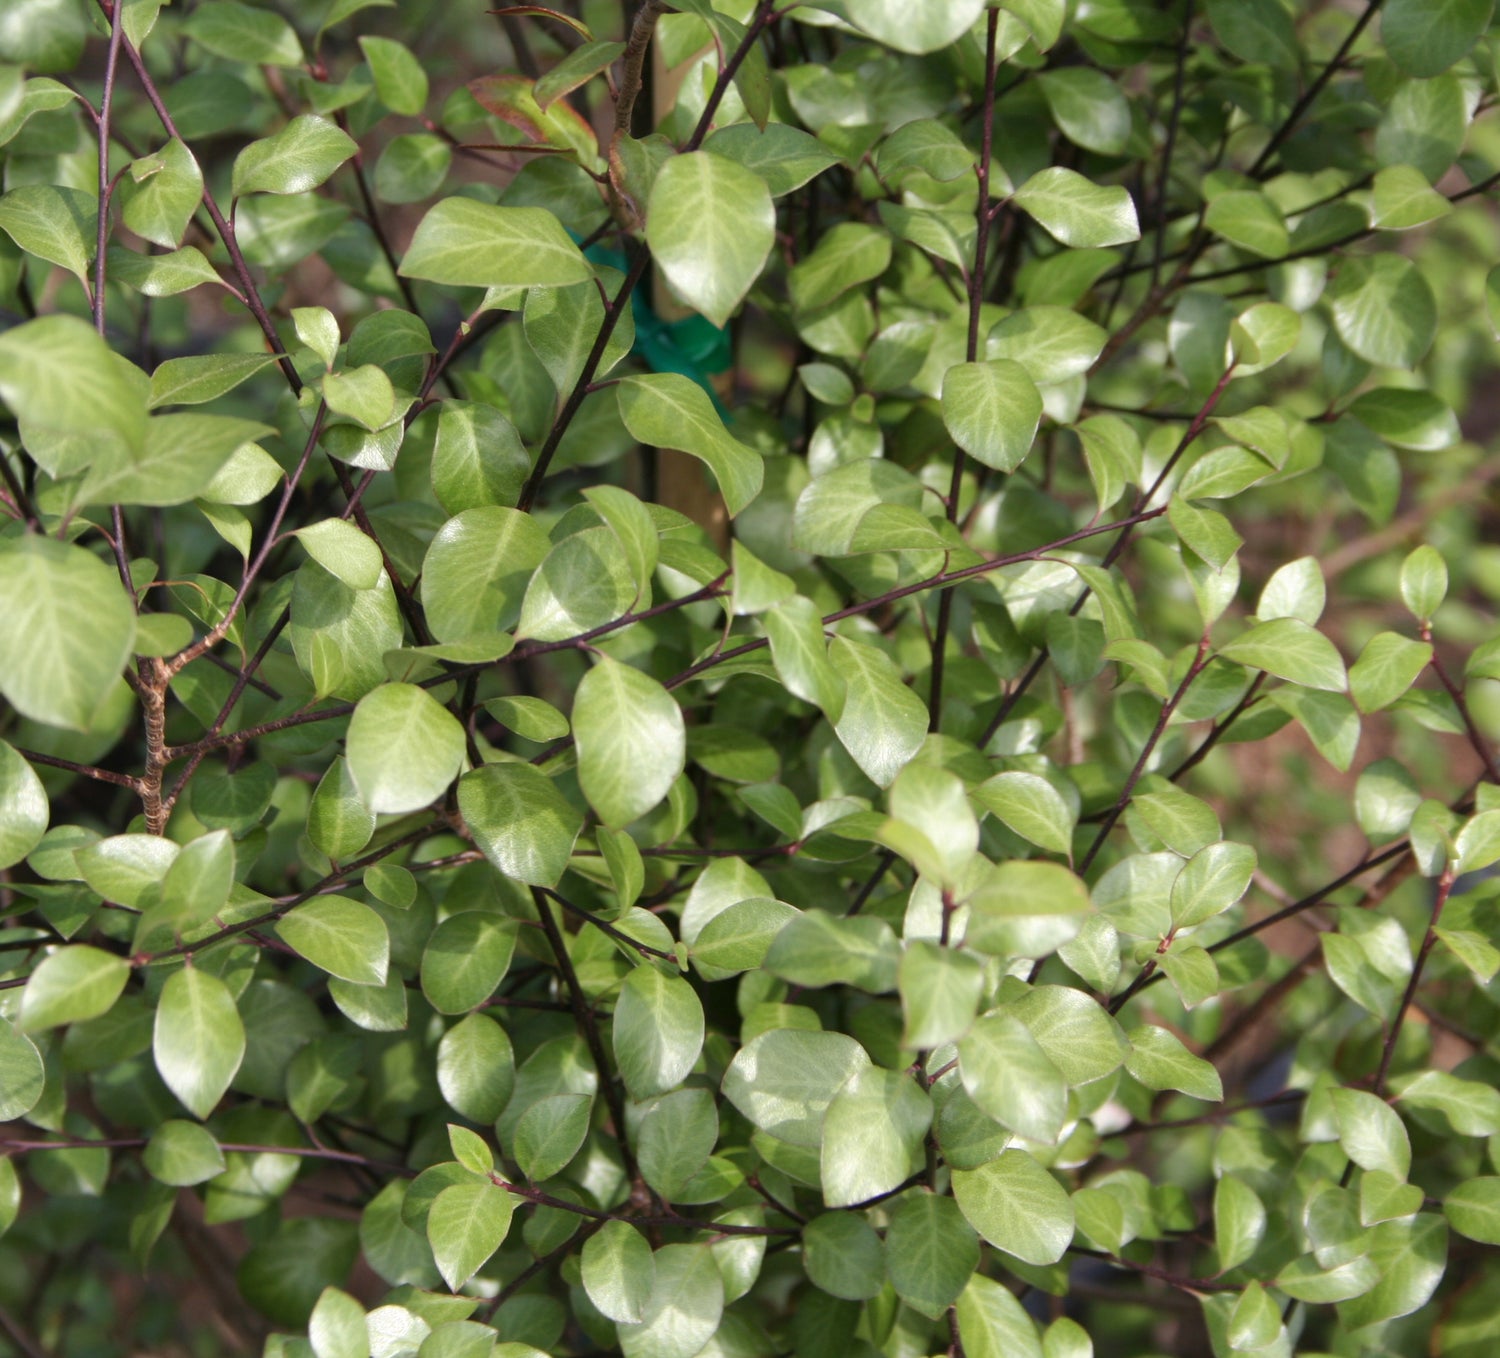 A close-up of a green bush with leaves, known as a silver sheen privacy hedge.